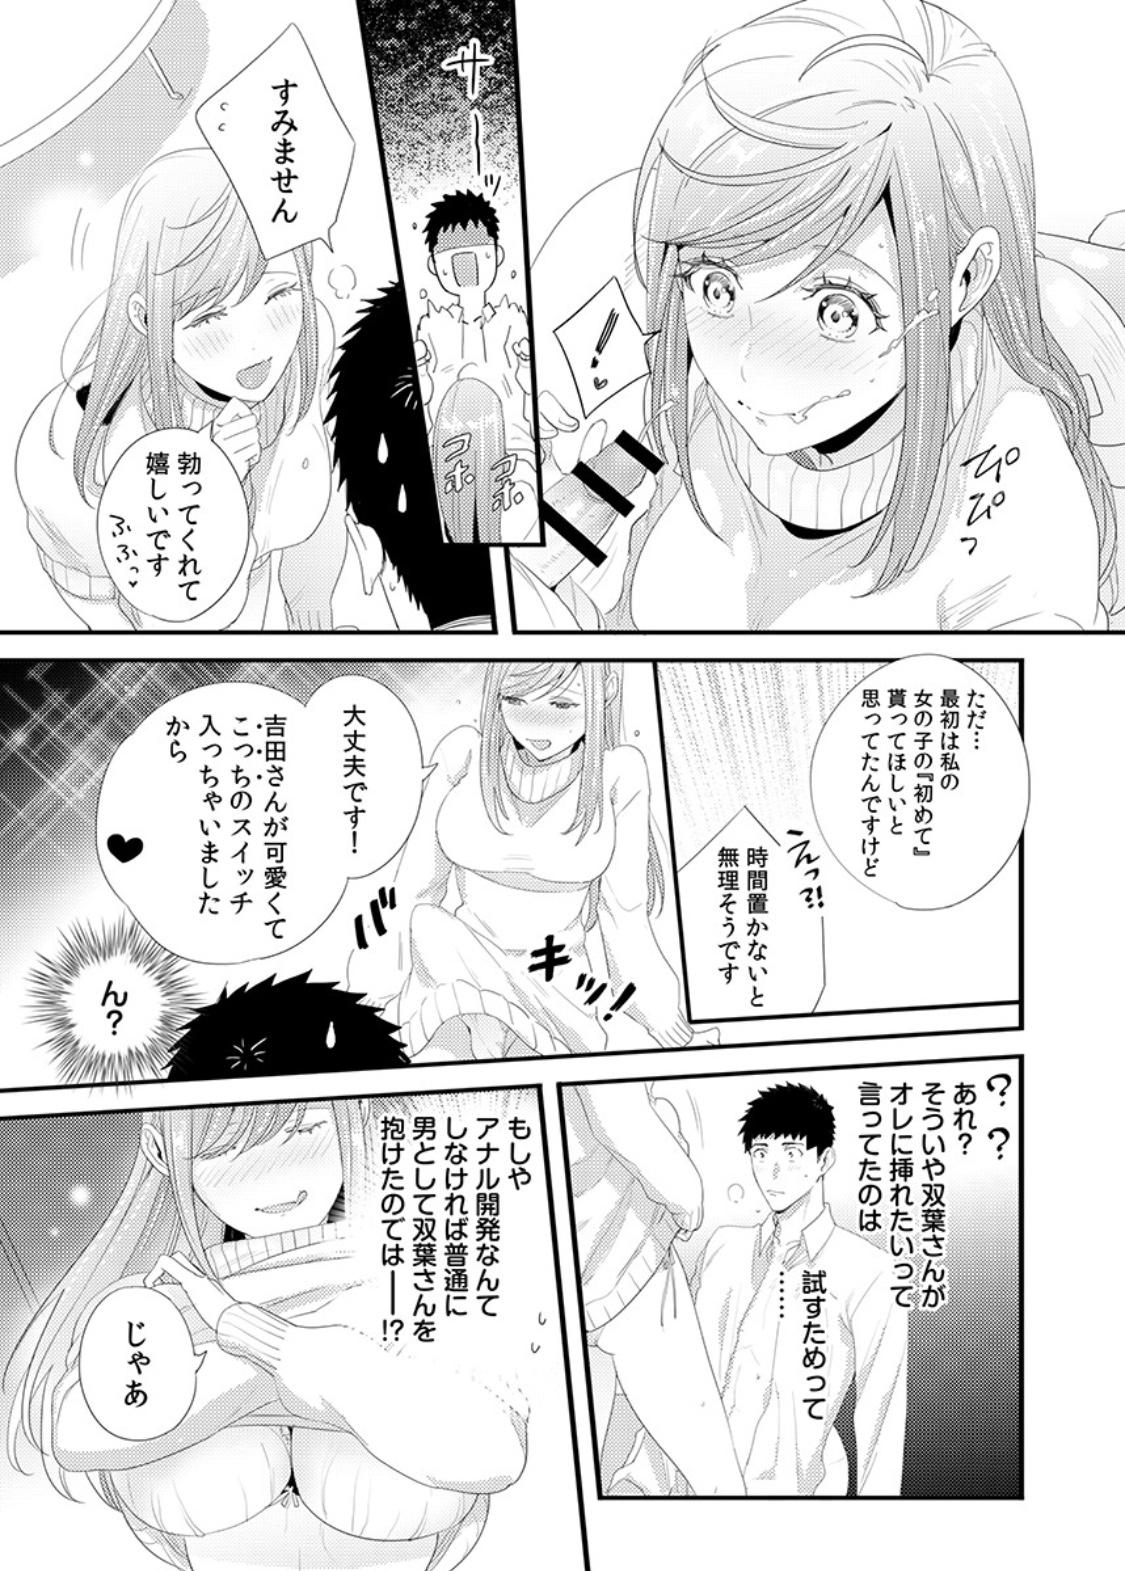 Please Let Me Hold You Futaba-San! Ch. 1-4 51